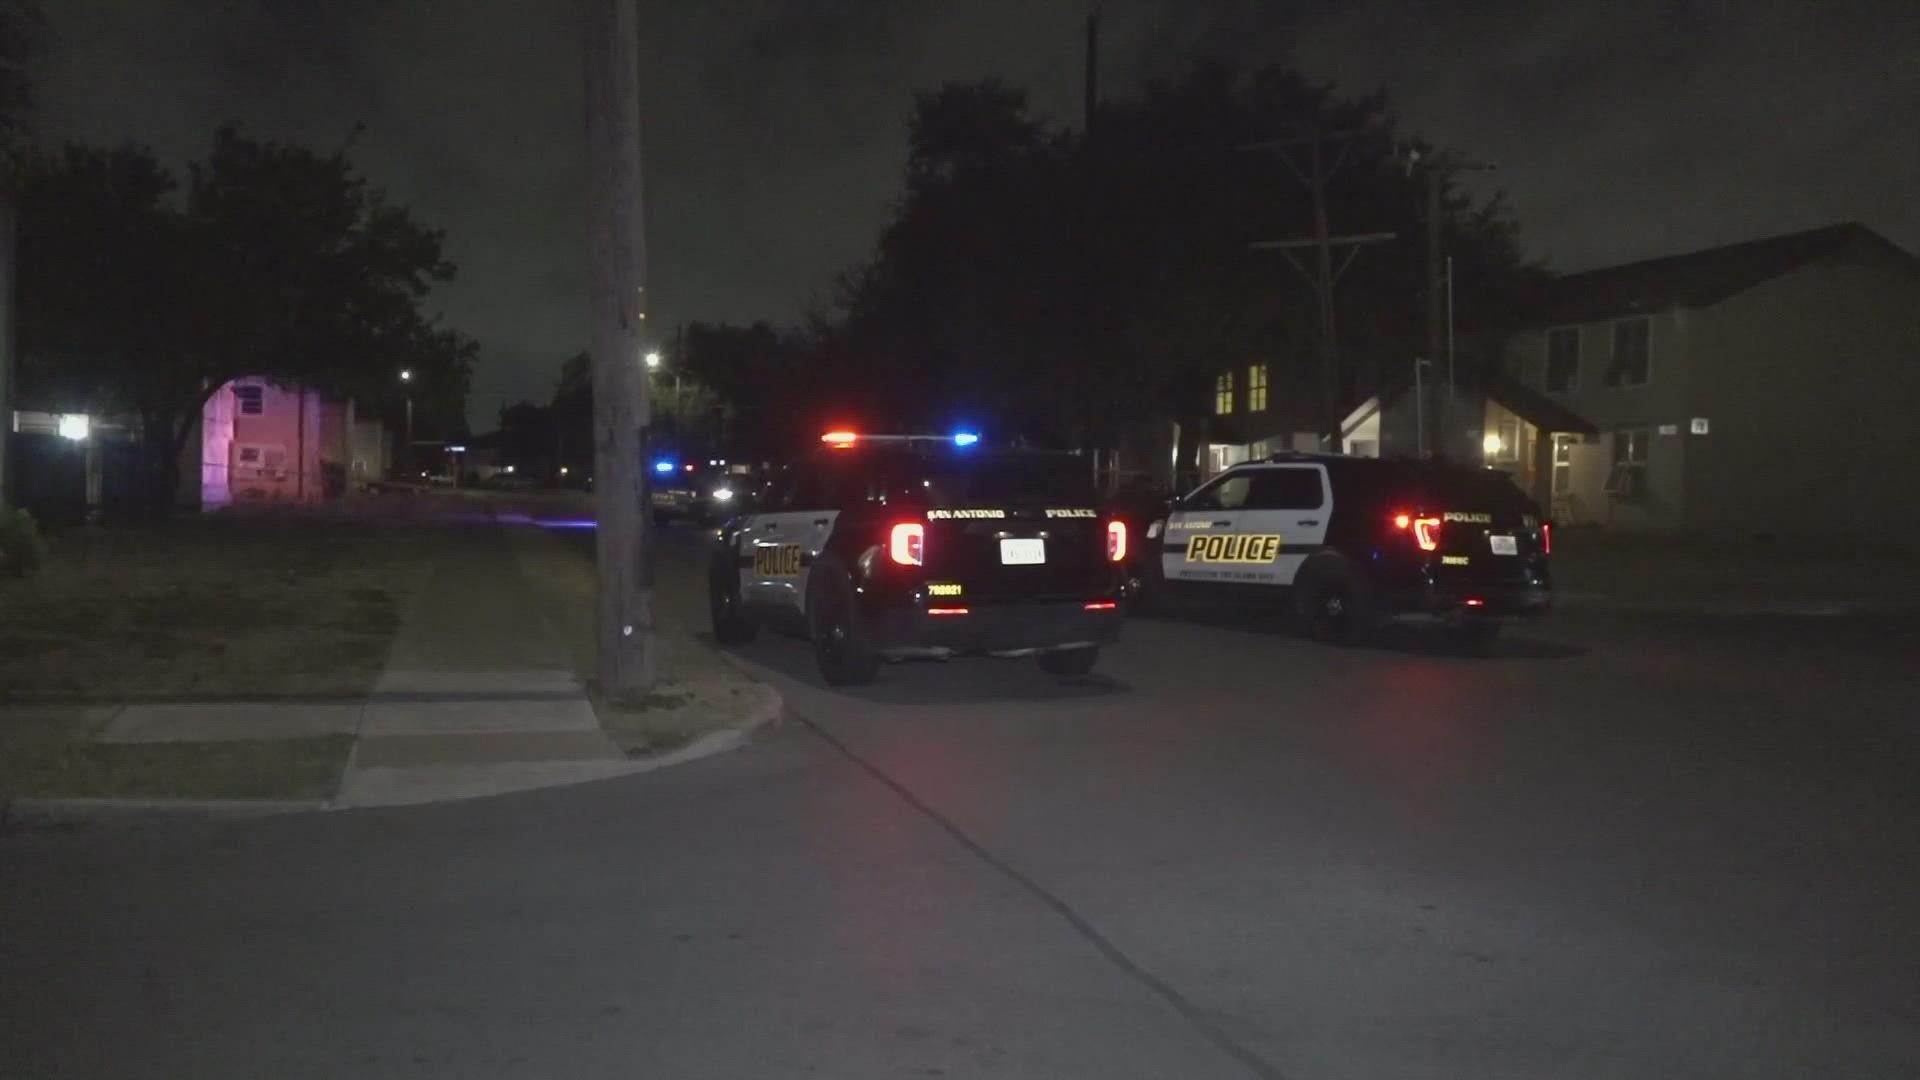 An SAPD investigator confirmed that casings found came from an AK-47 style rifle.